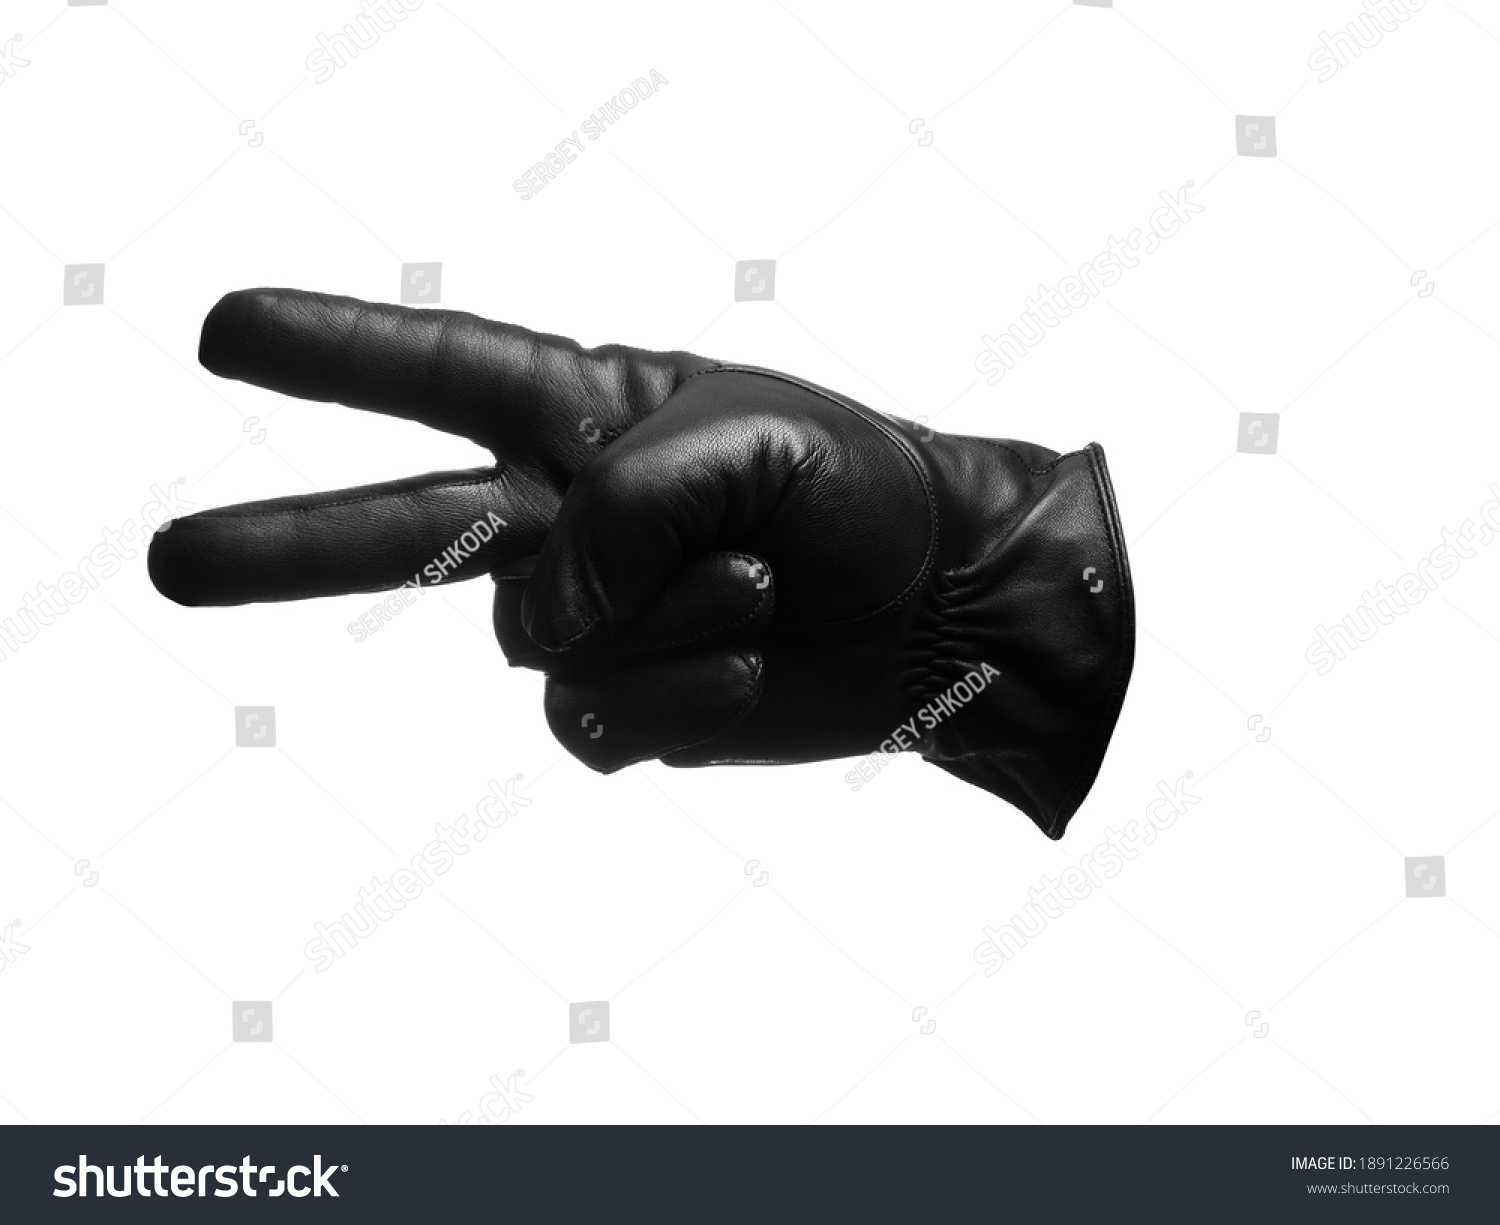 black leather glove shows two fingers gesture. isolated white background. #1891226566